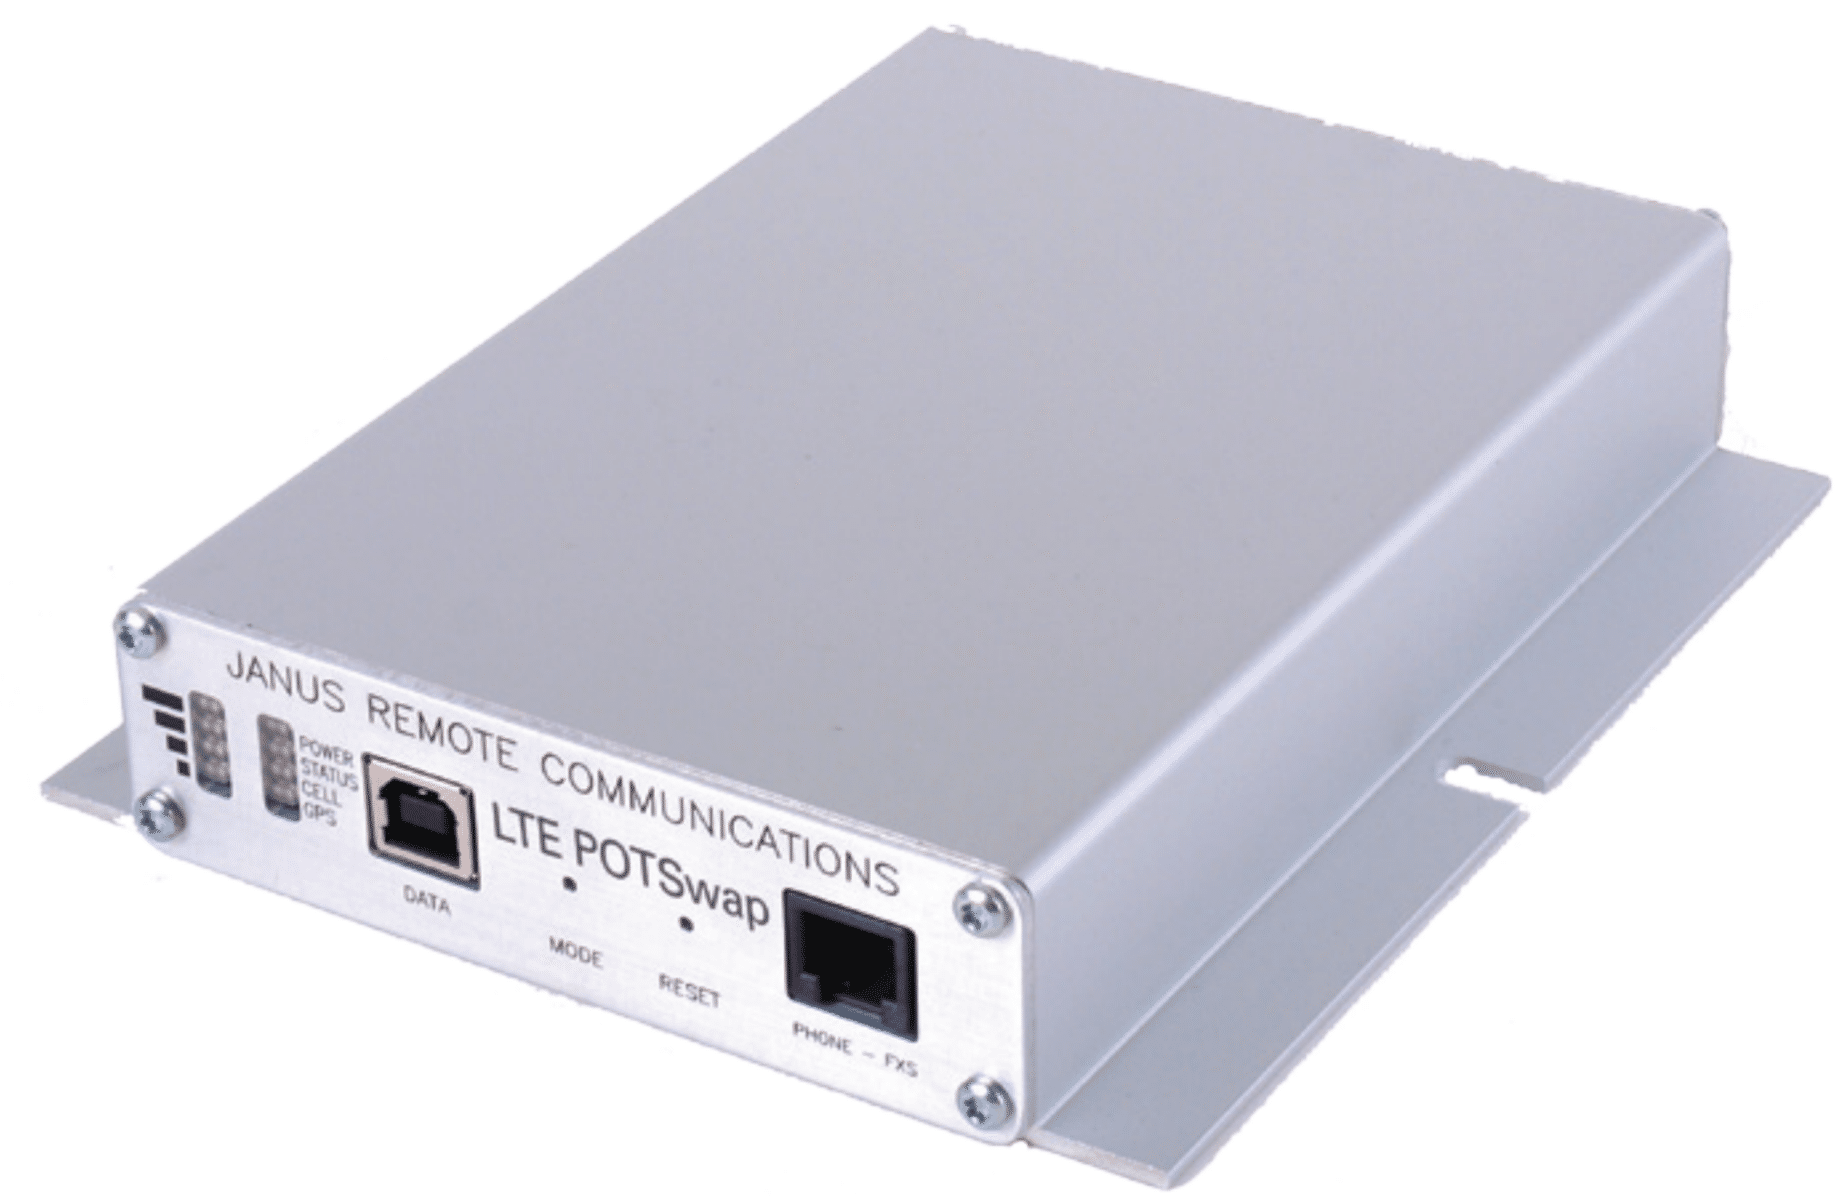 4G LTE Cellular Interface (Verizon Network) for Analog Call Stations